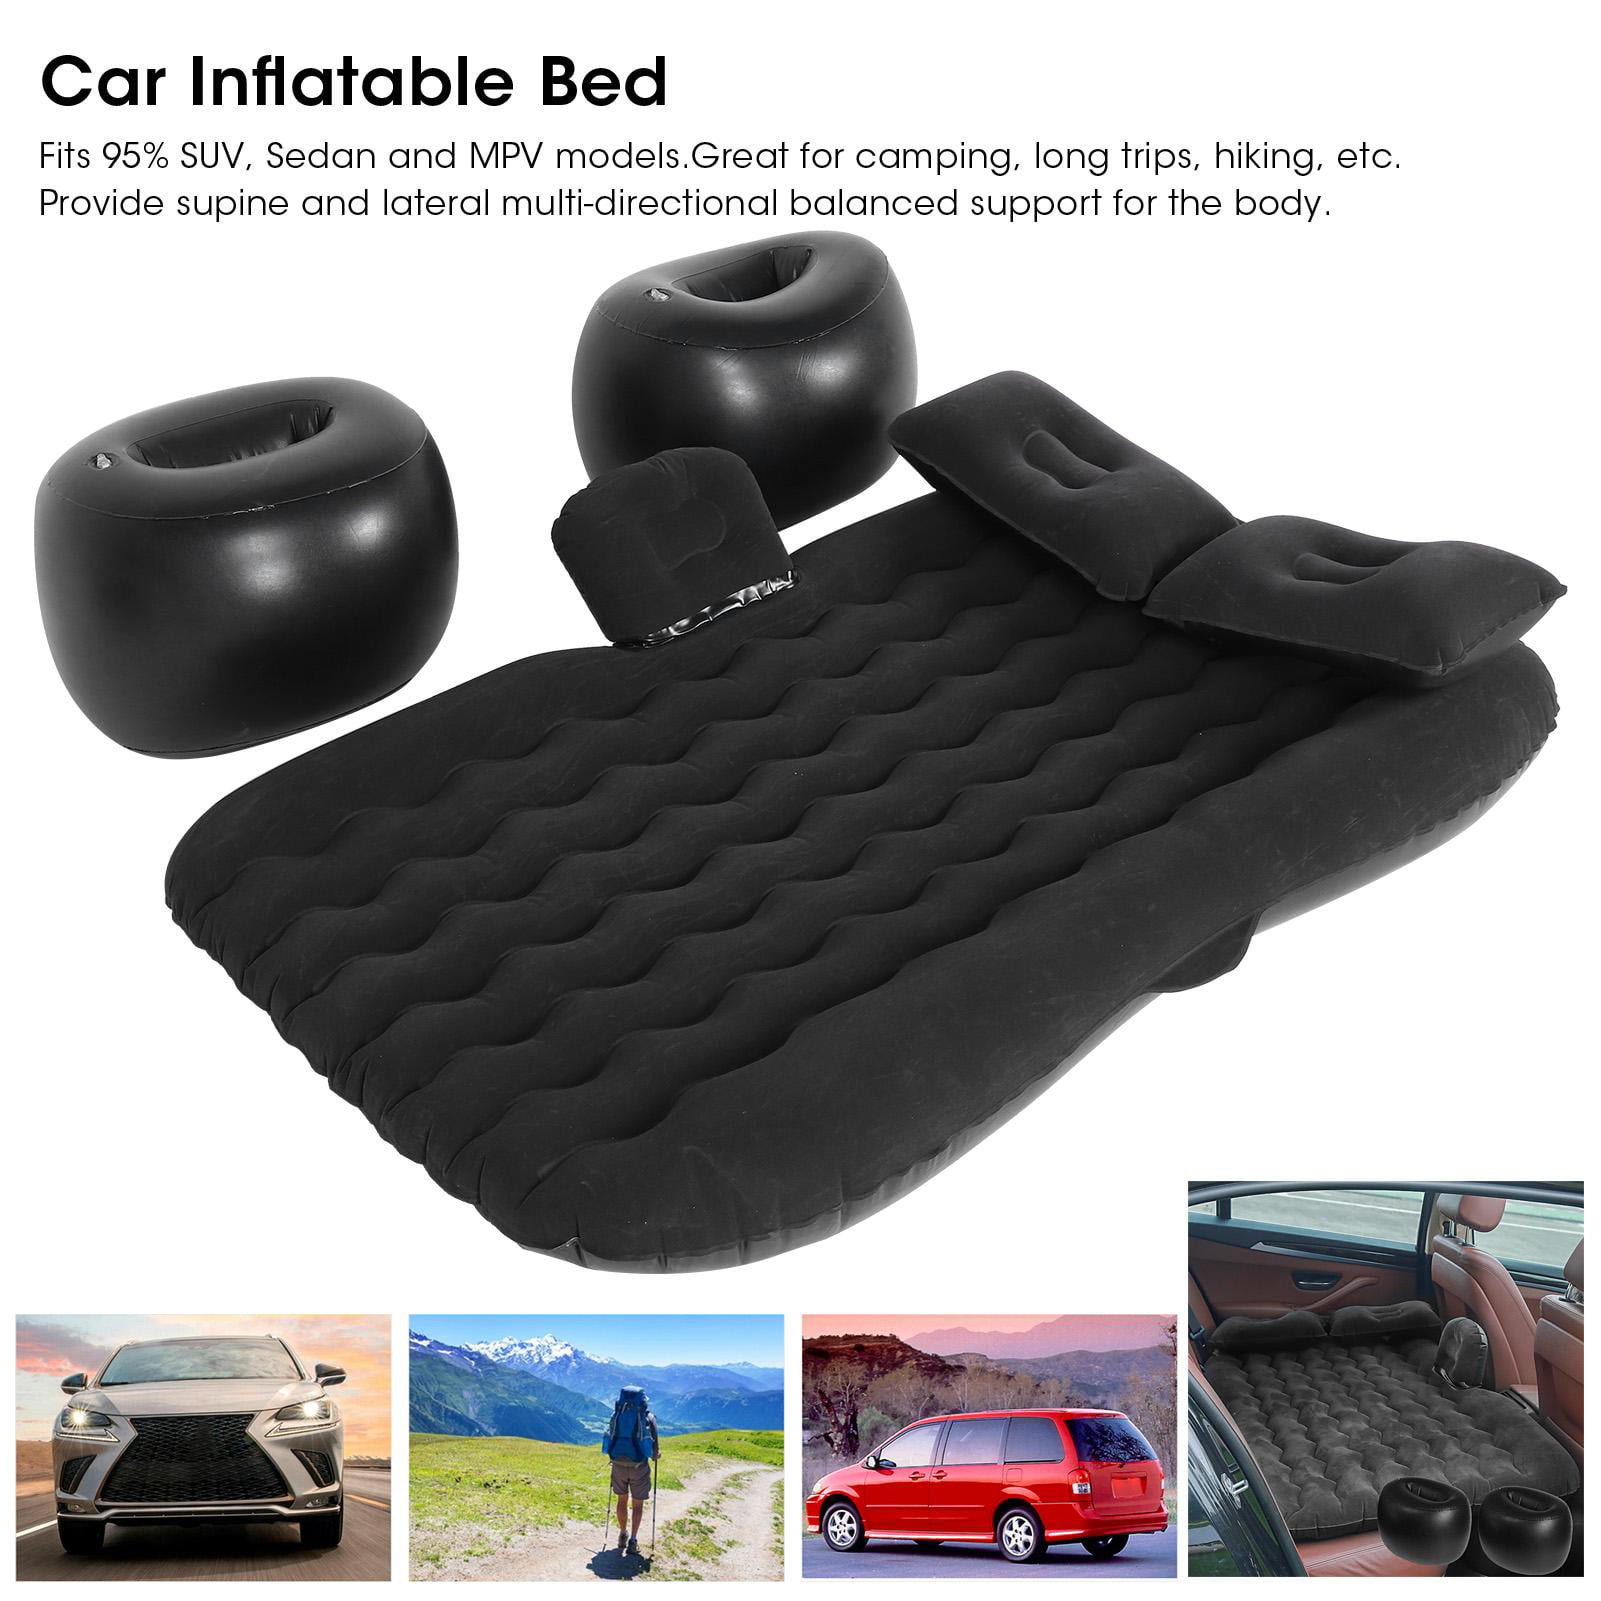 Black PVC Flocking Car Travel Bed Inflatable Travel Mattress Portable Soft Split Sleeping Rest Cushion for Home Outdoor Camping Self‑Driving Tour Estink Car Air Mattress